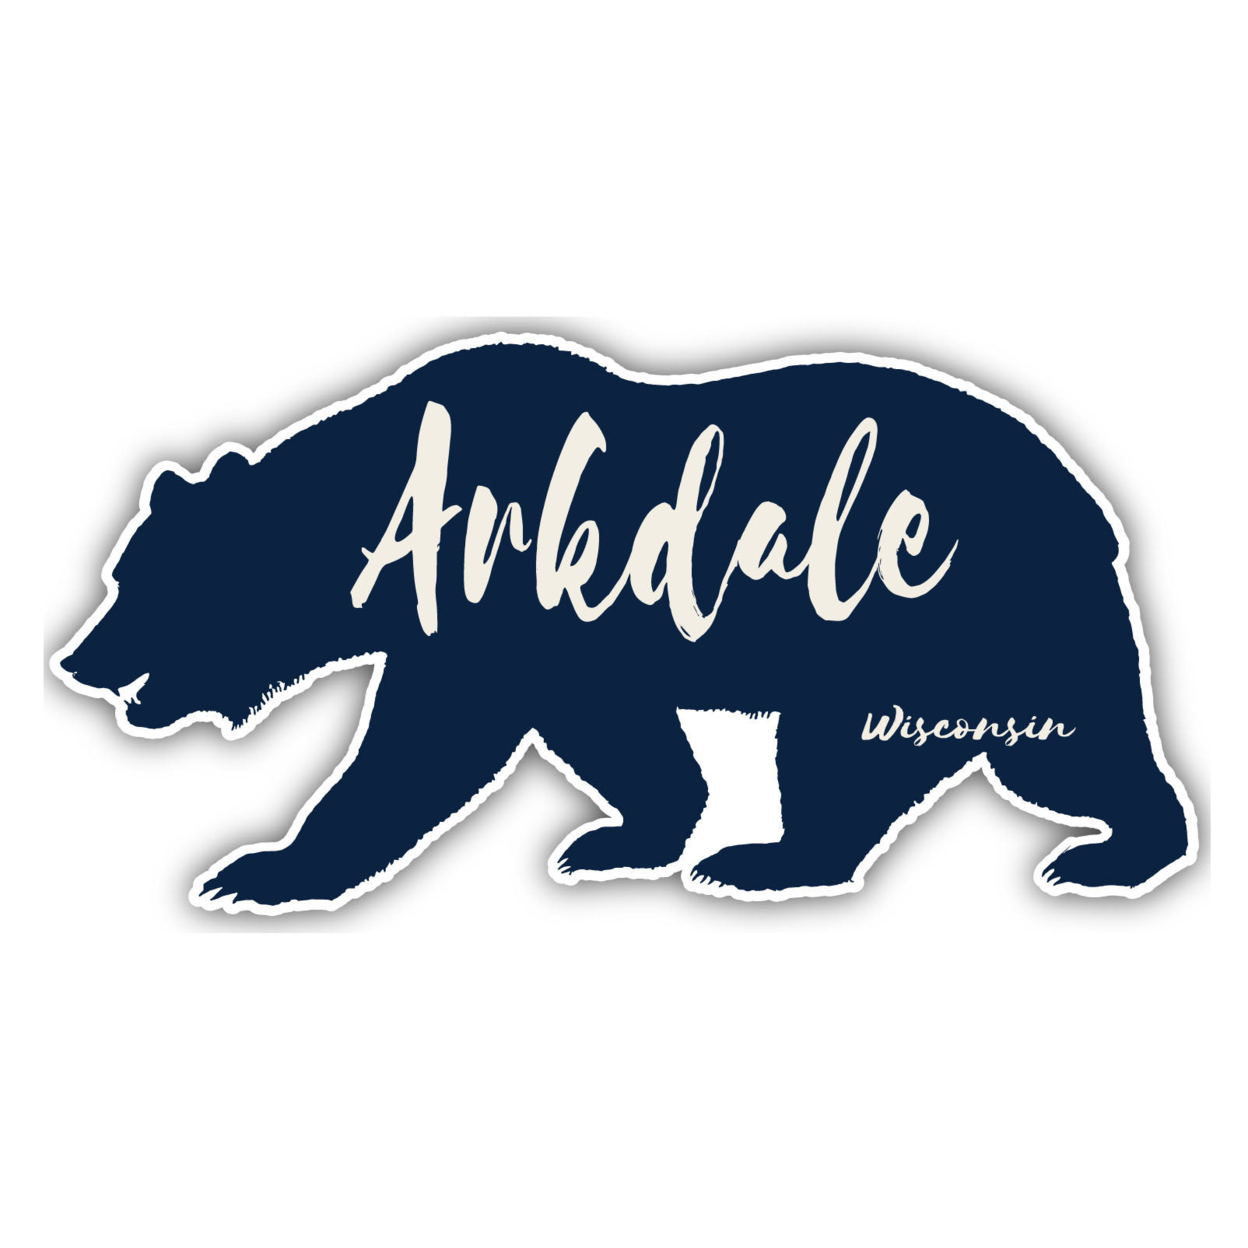 Arkdale Wisconsin Souvenir Decorative Stickers (Choose Theme And Size) - Single Unit, 10-Inch, Tent